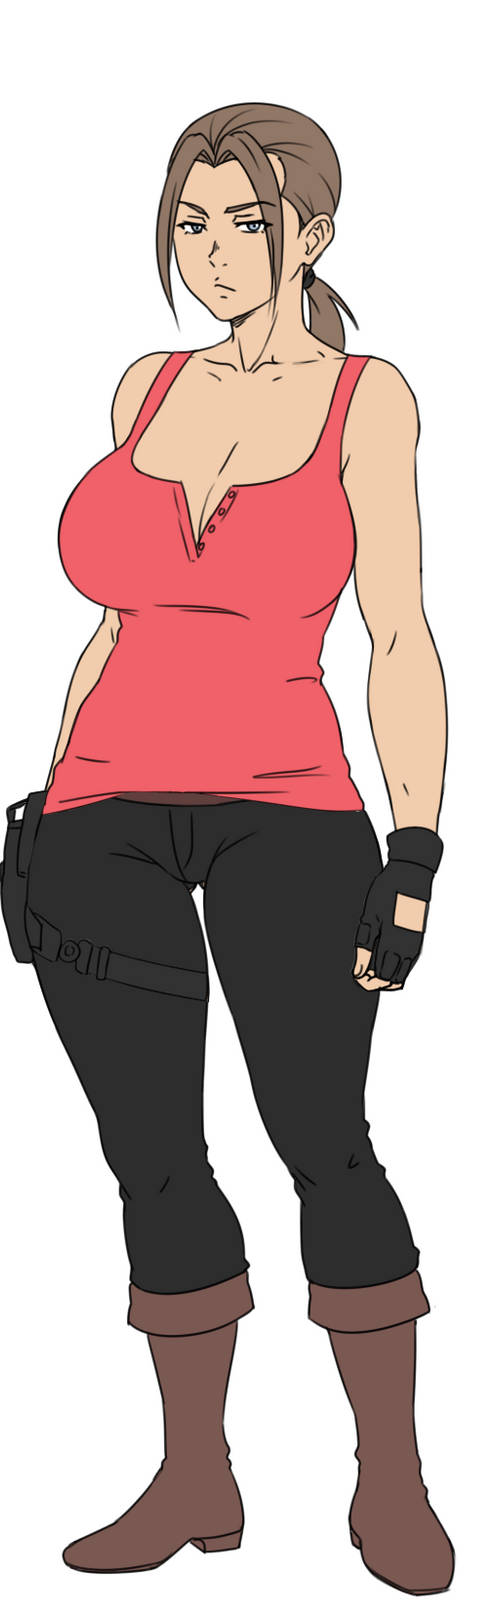 'Jane Doe' (Mei Lopez) Casual_2_with_gloves_ponytail_holster_by_akiyamamoto77_dctzrb9-pre